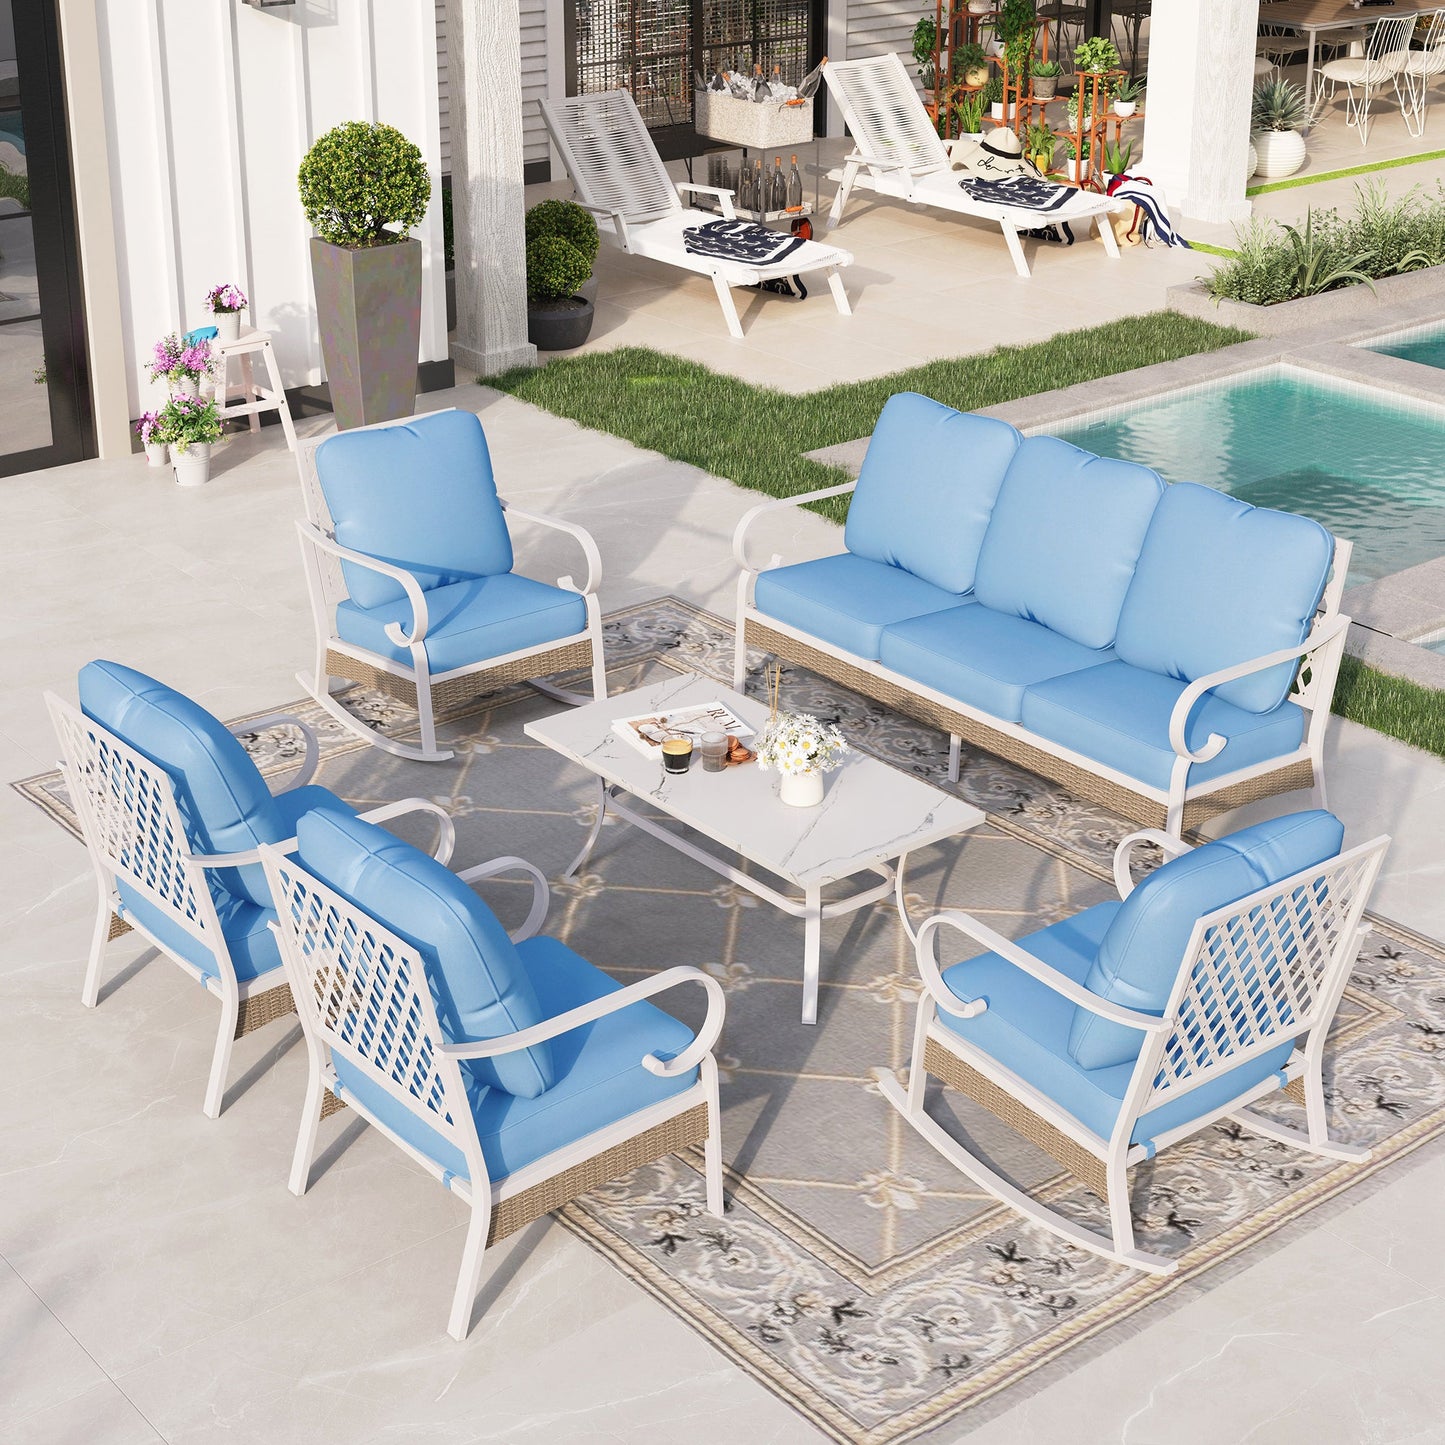 Sophia&William 6 Piece Patio Conversation Set Outdoor Furniture Sofa Set with Fixed & Rocking Chair, Blue